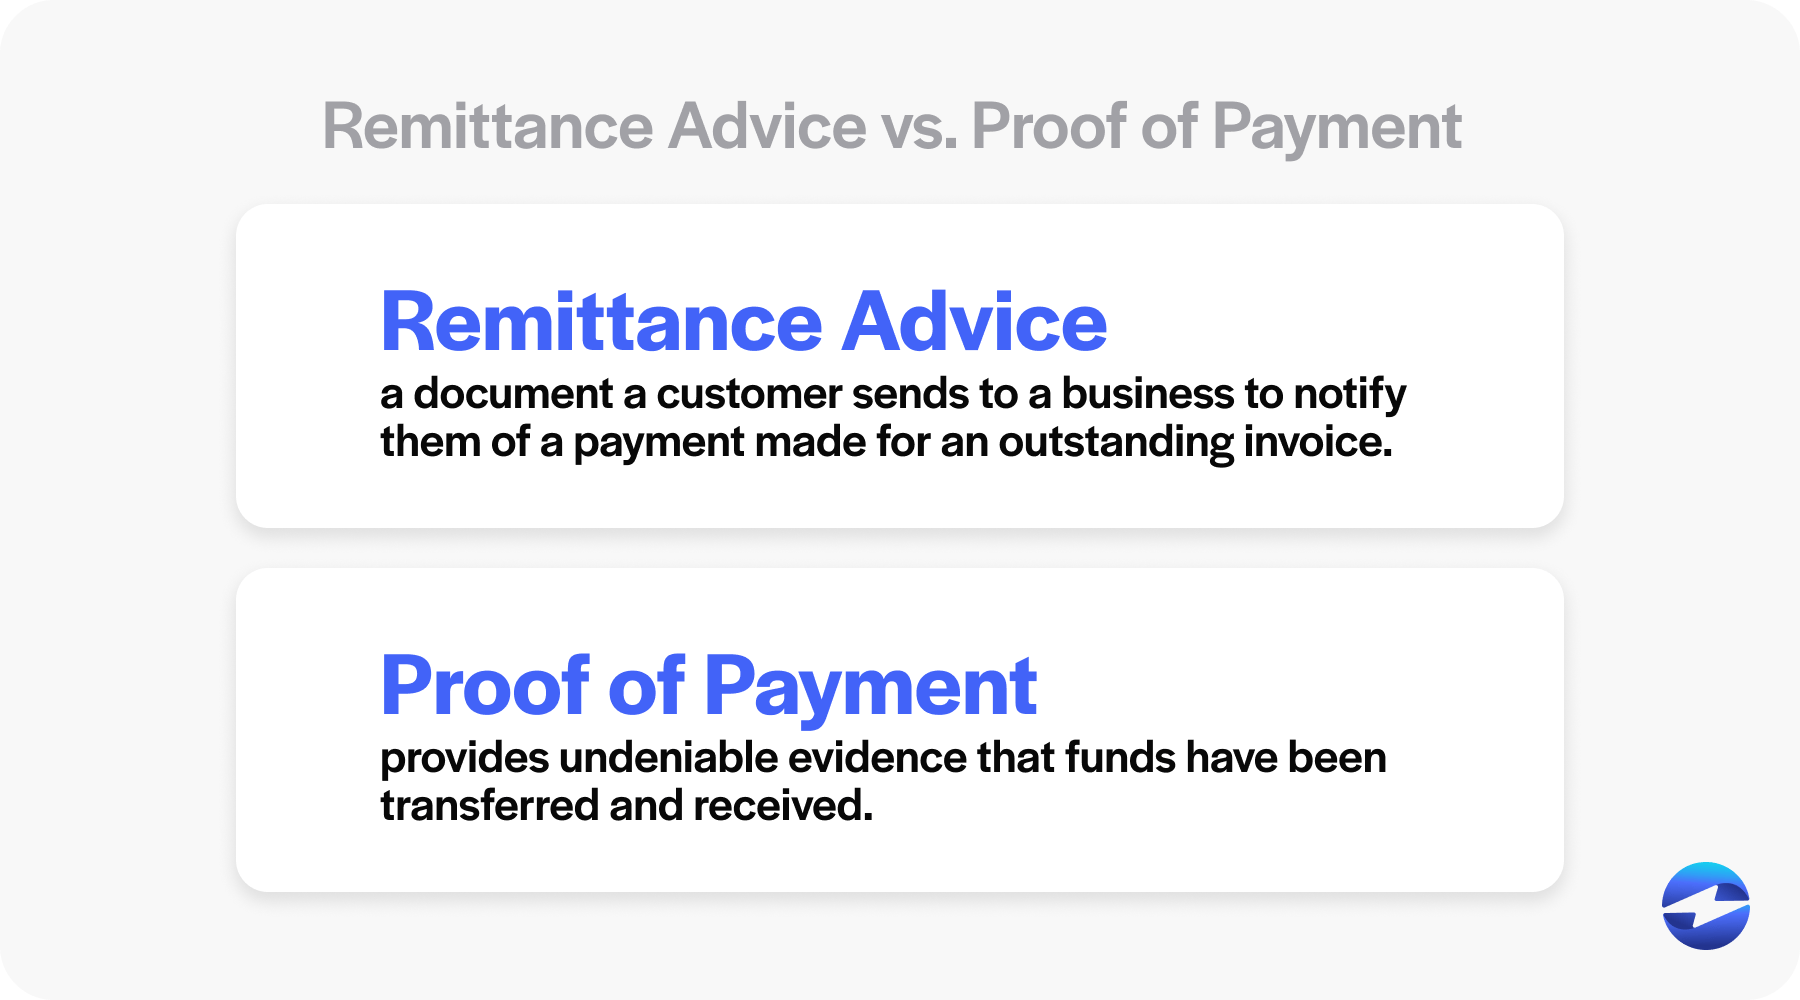 Is remittance advice proof of payment?